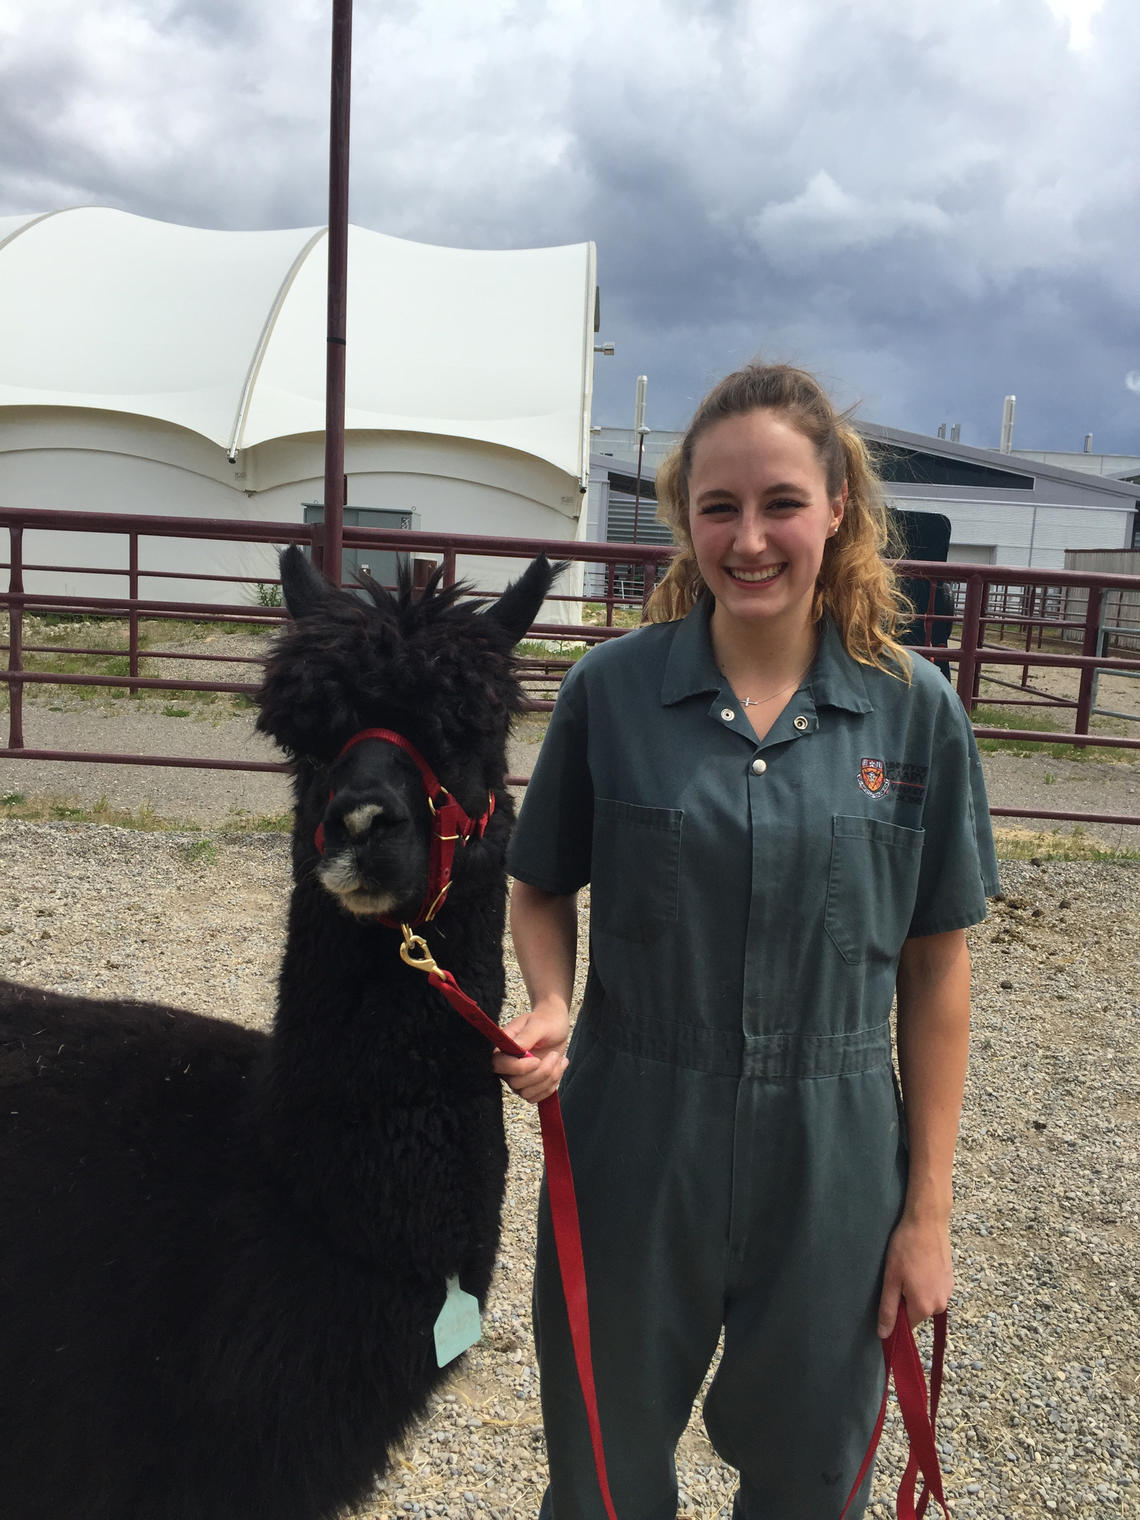 As a veterinarian, Lauren Sherwood plans to work with large animals such as cows, horses ... and the occasional alpaca.